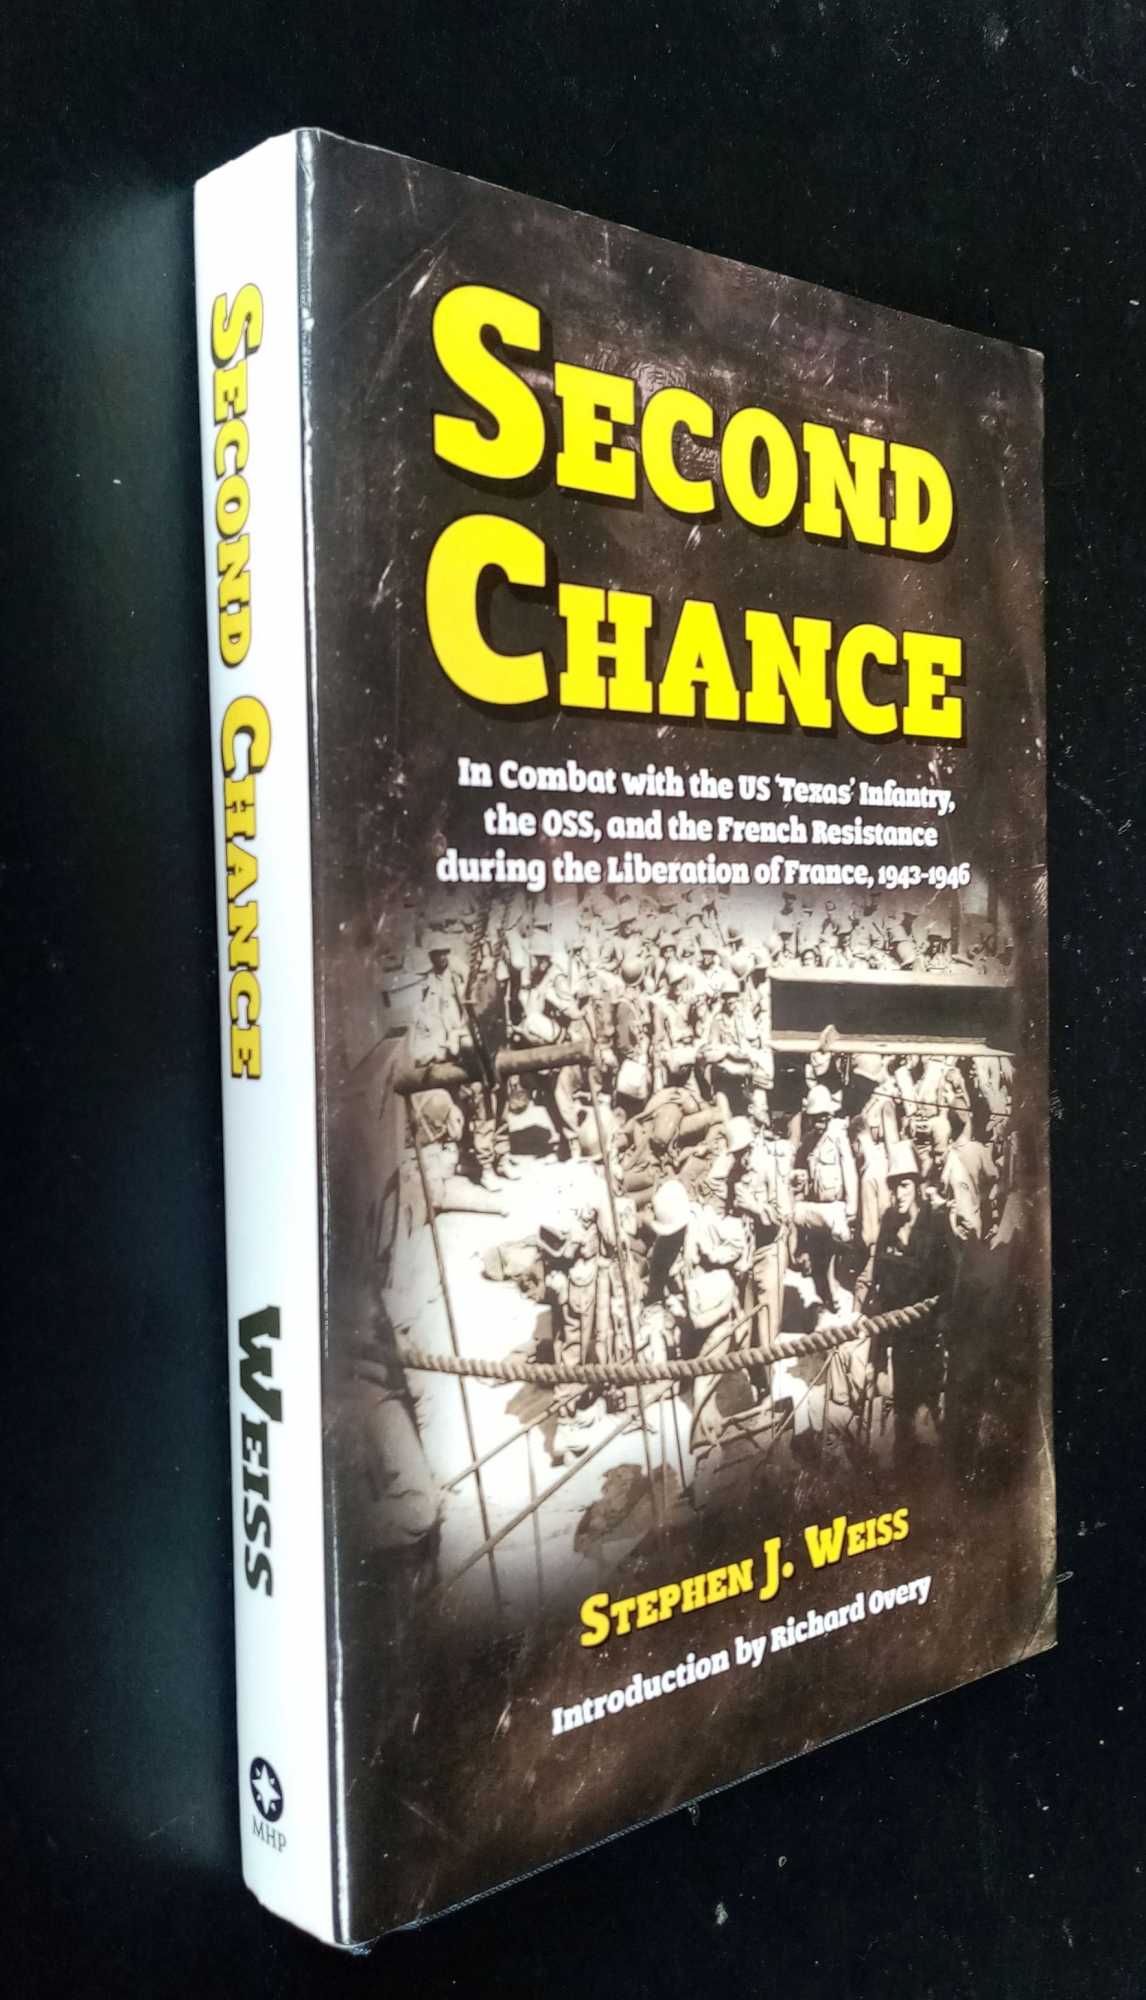 Stephen J Weiss - Second Chance: In Combat with the US 'Texas' Infantry, the OSS, and the French Resistance during the Liberation of France, 1943-1946    SIGNED/Inscribed